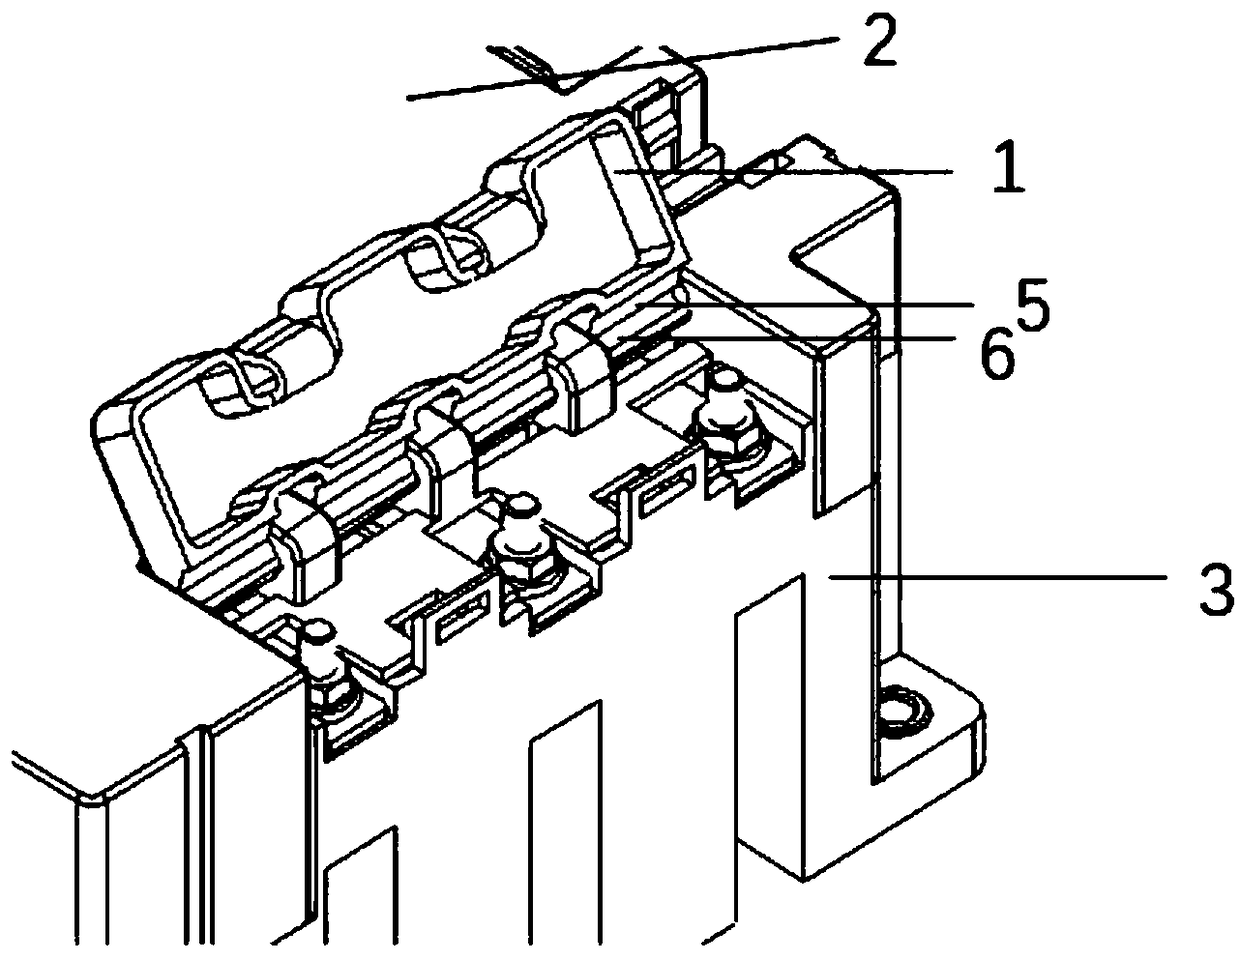 A protective cover plate at the input and output ends of a battery disconnecting unit and a high-voltage distribution box